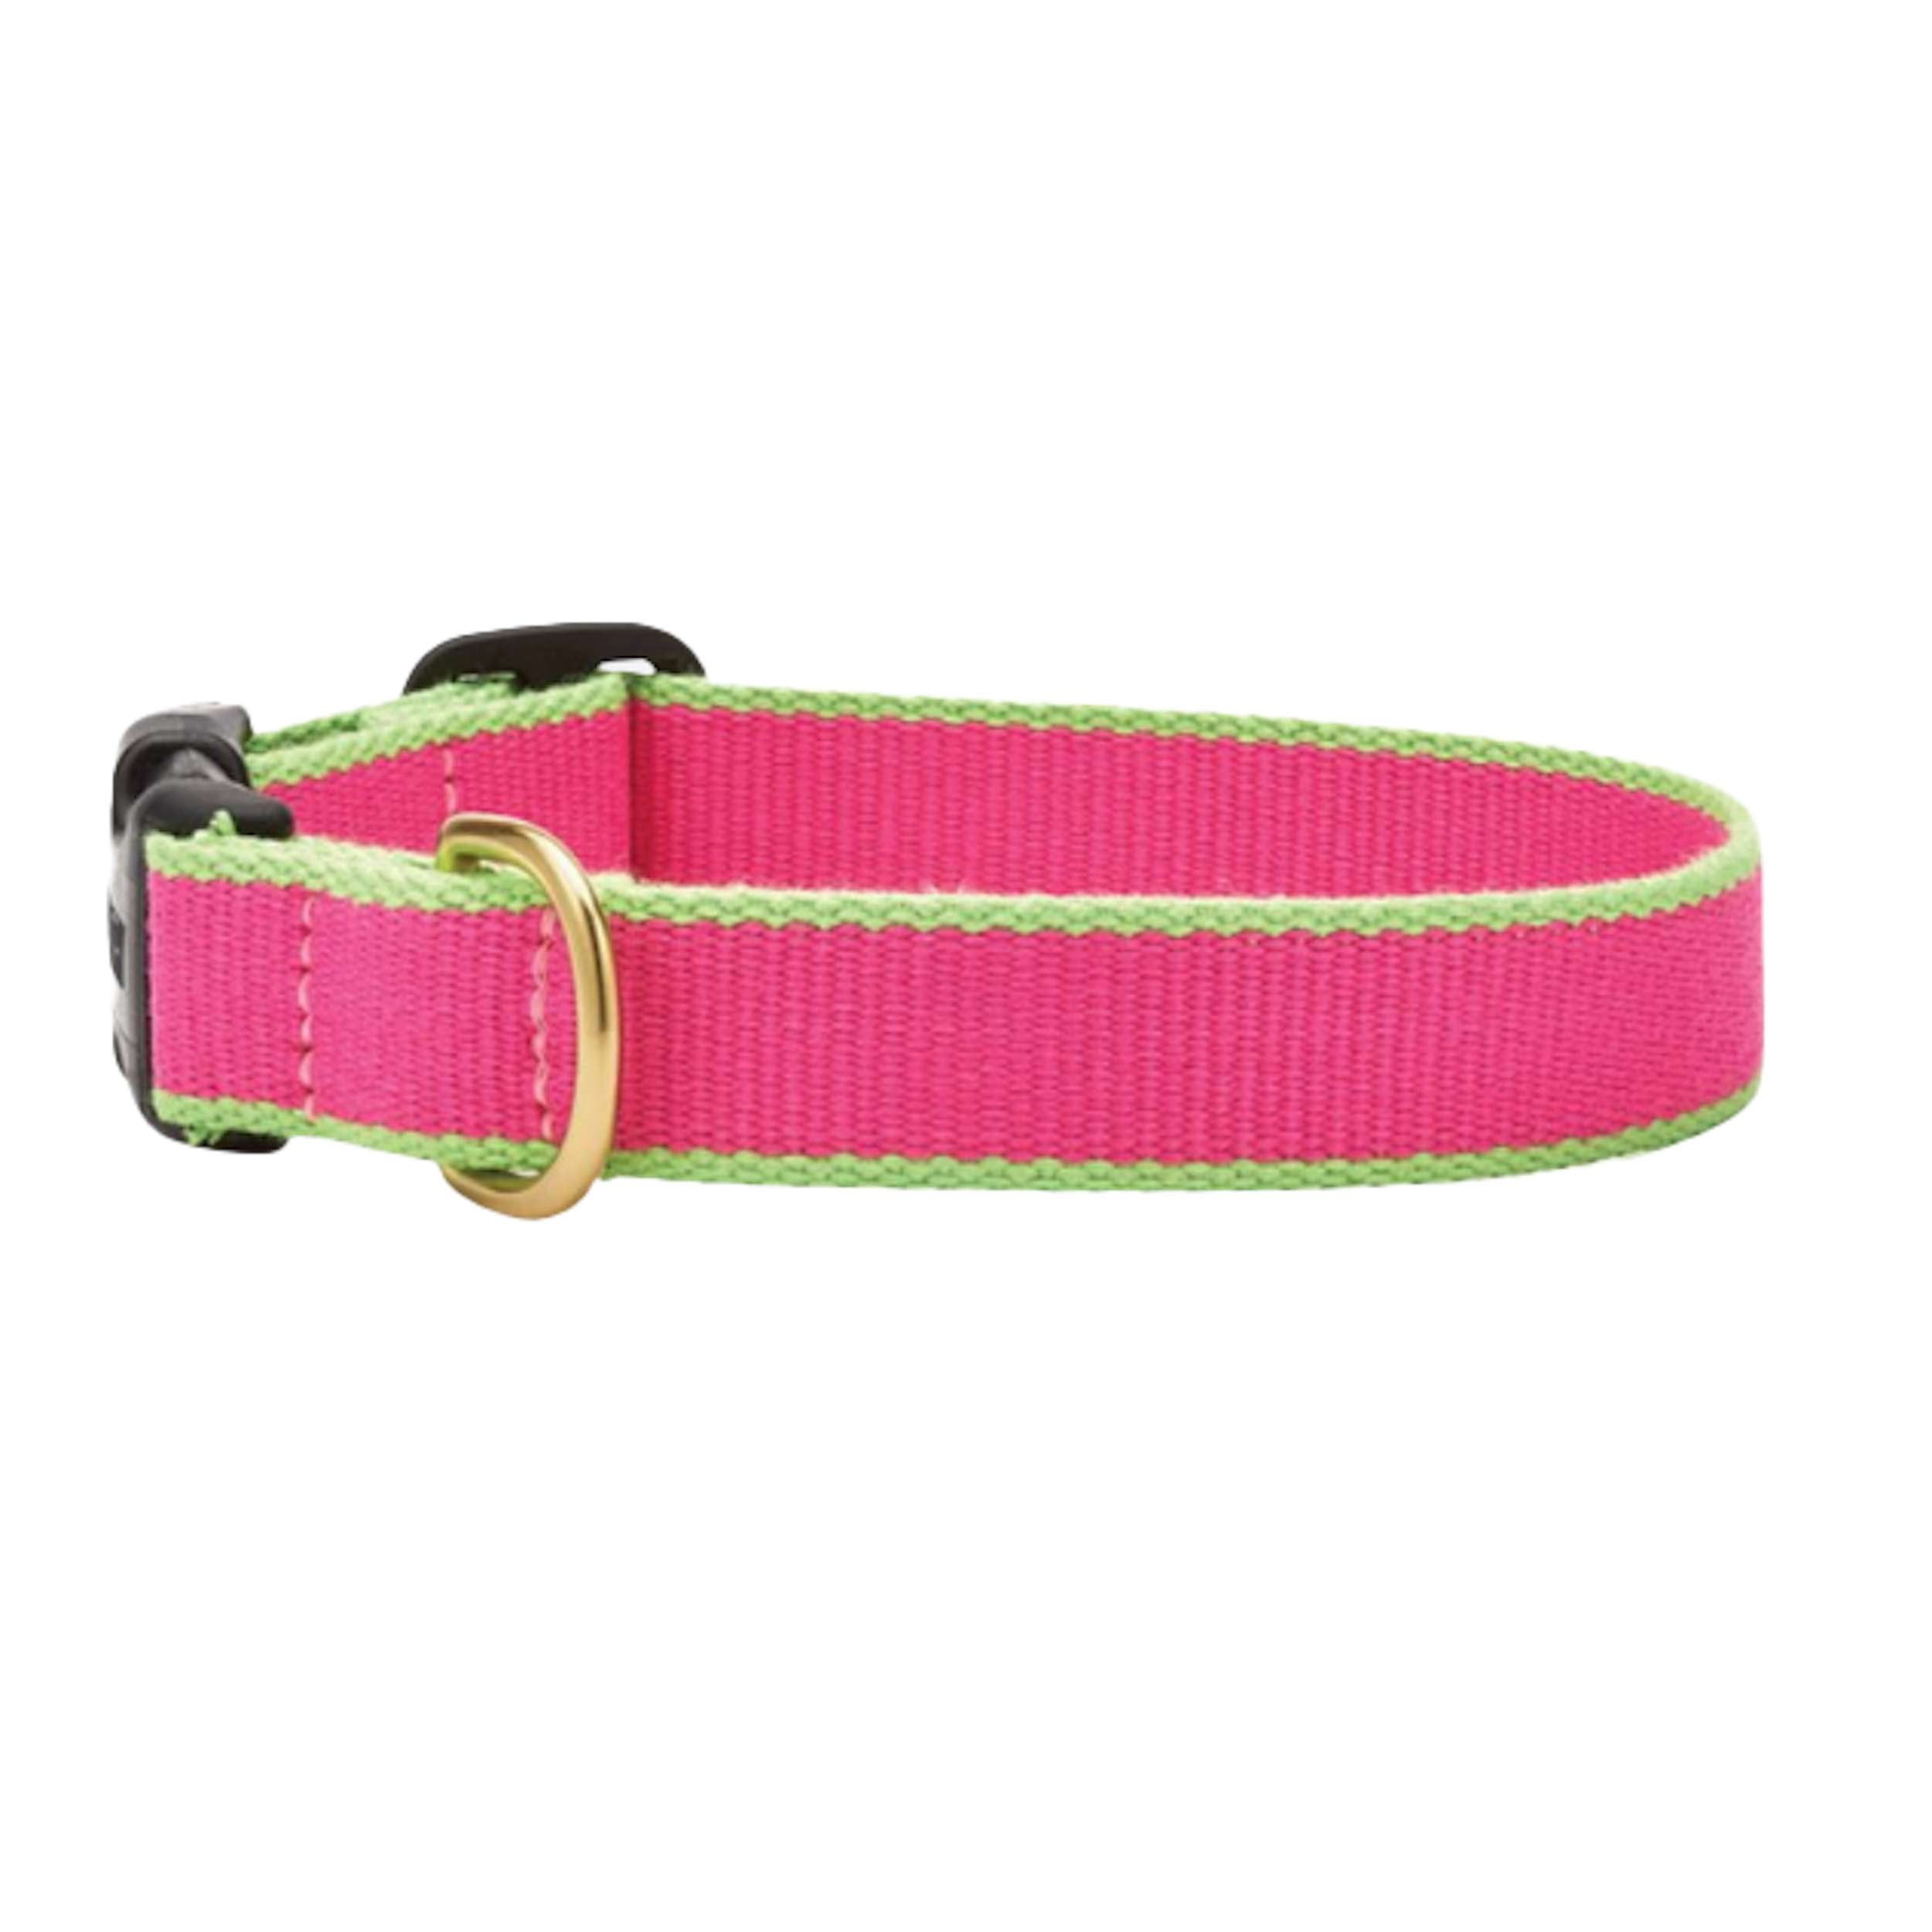 BRIGHT-PINK-LIME-DOG-COLLAR